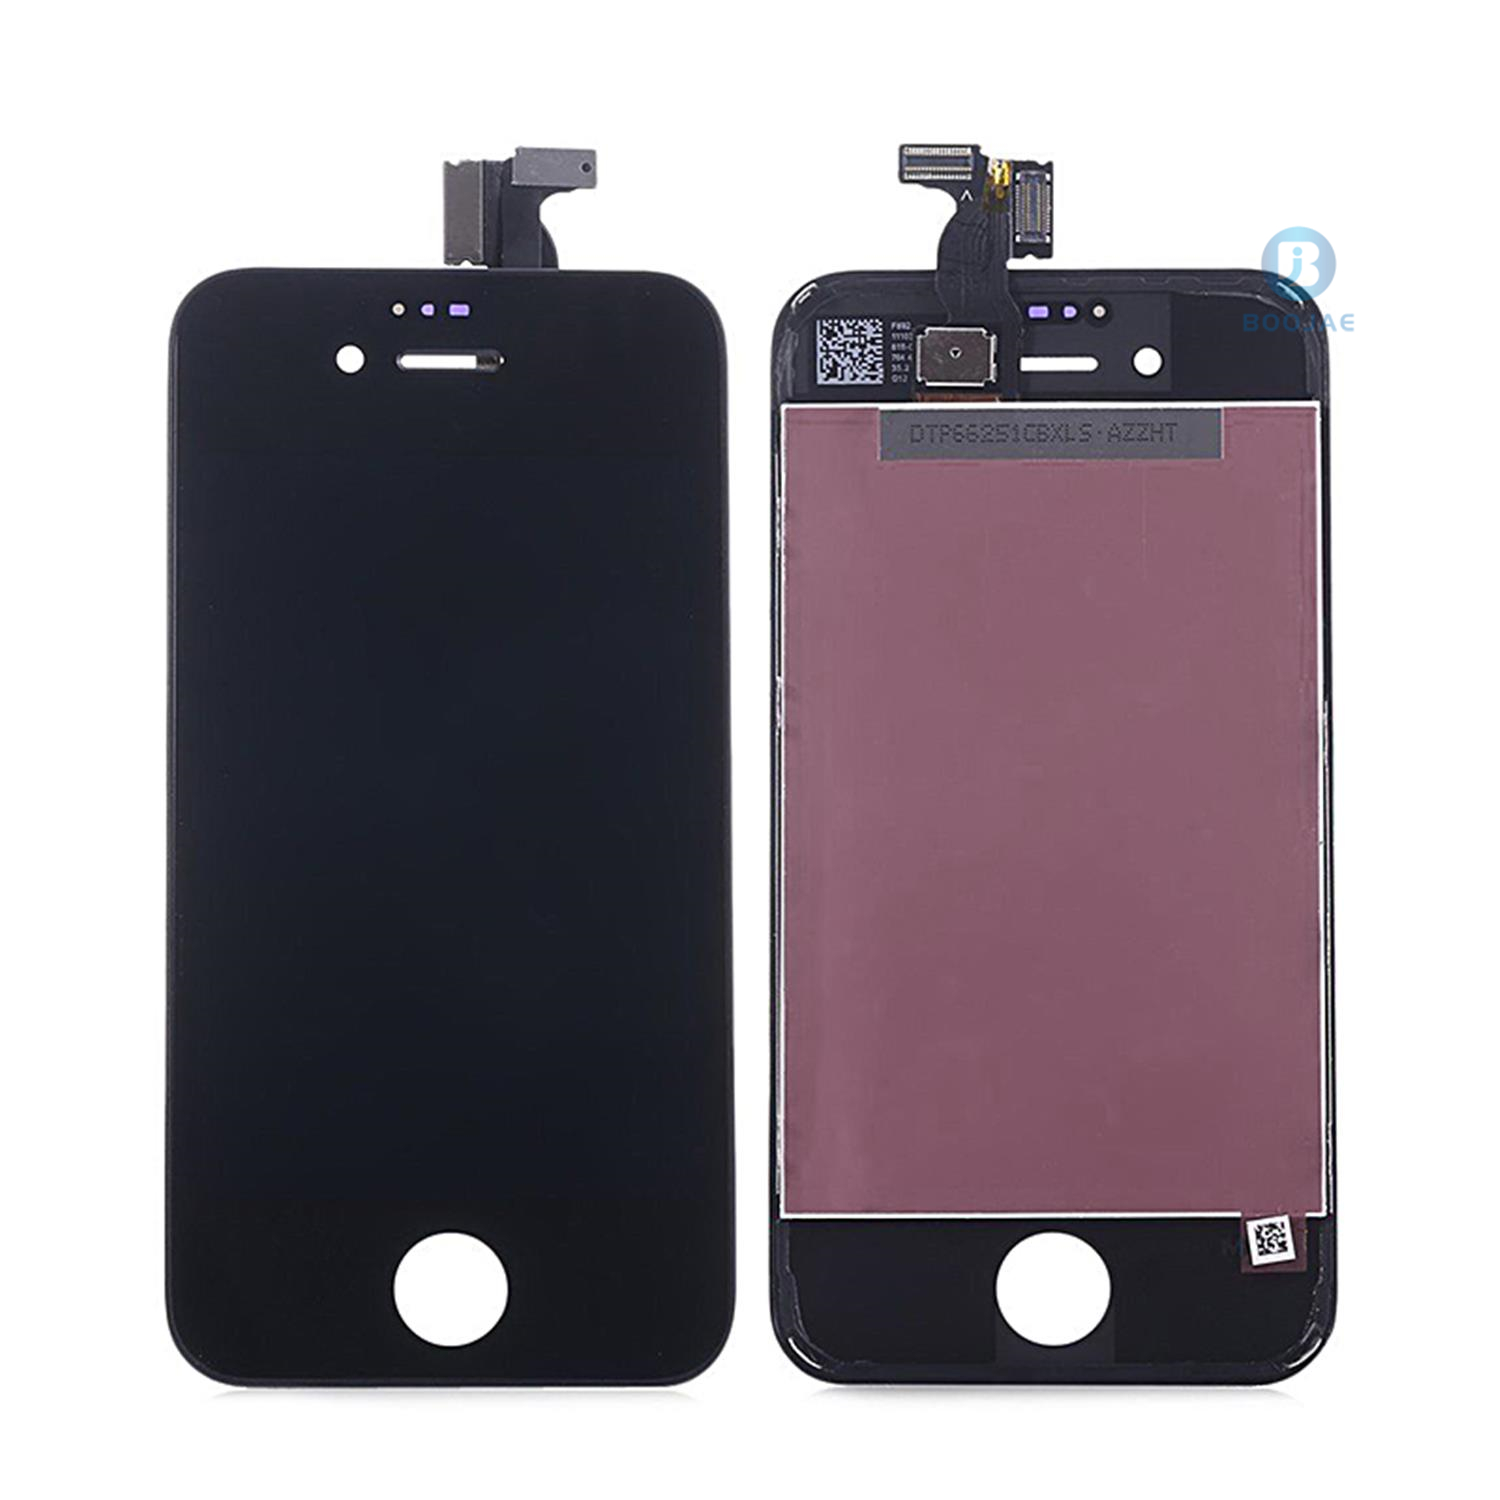 iPhone 4S LCD Screen Display and Touch Panel Digitizer iPhone LCD Wholesale